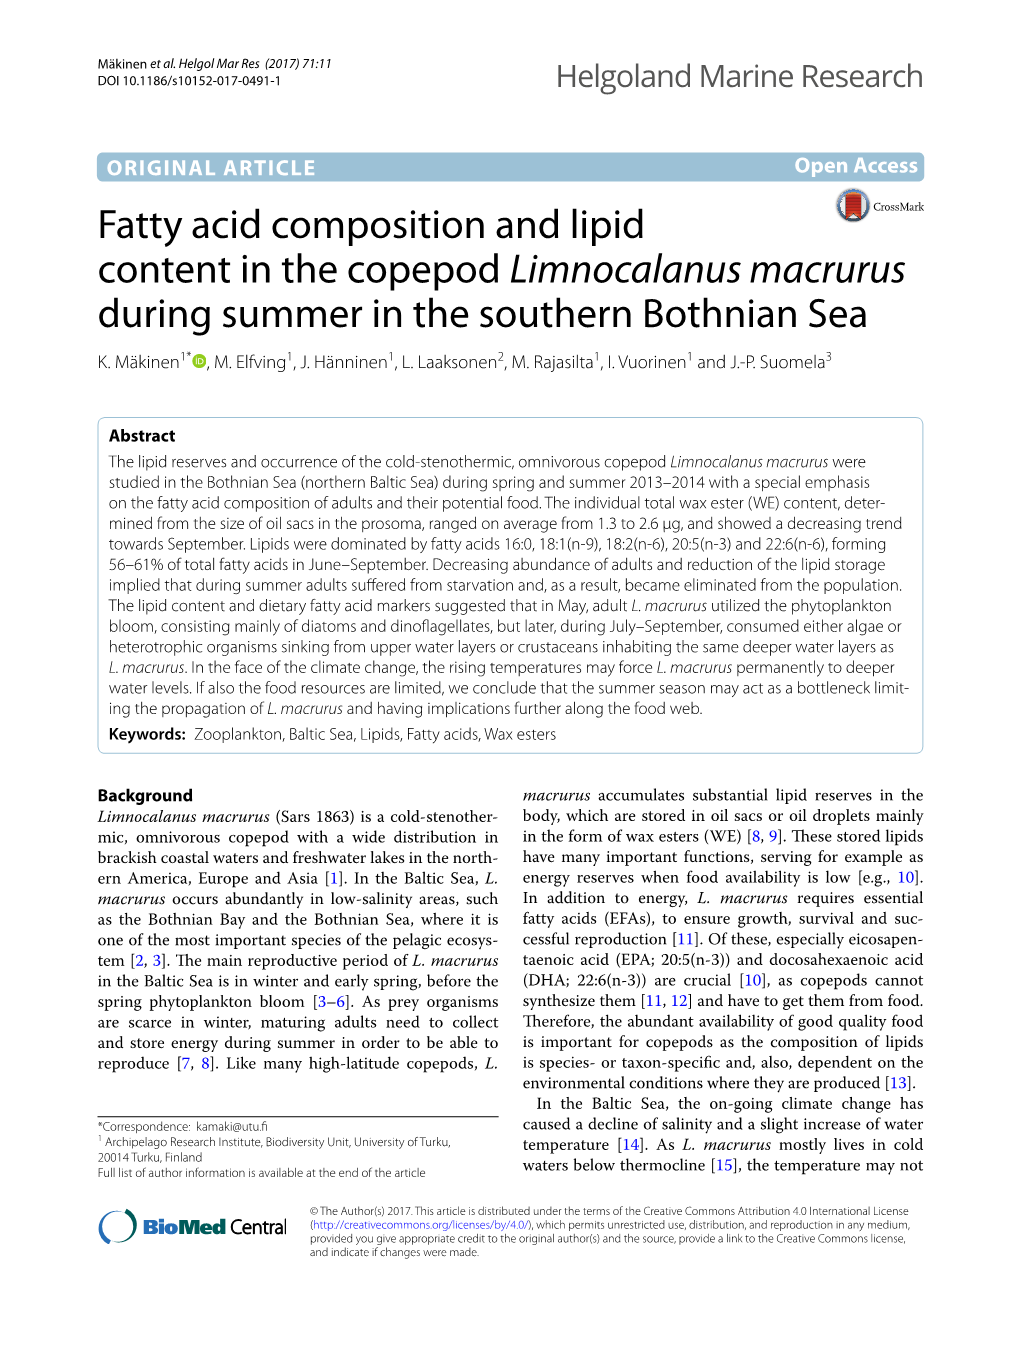 Fatty Acid Composition and Lipid Content in the Copepod Limnocalanus Macrurus During Summer in the Southern Bothnian Sea K